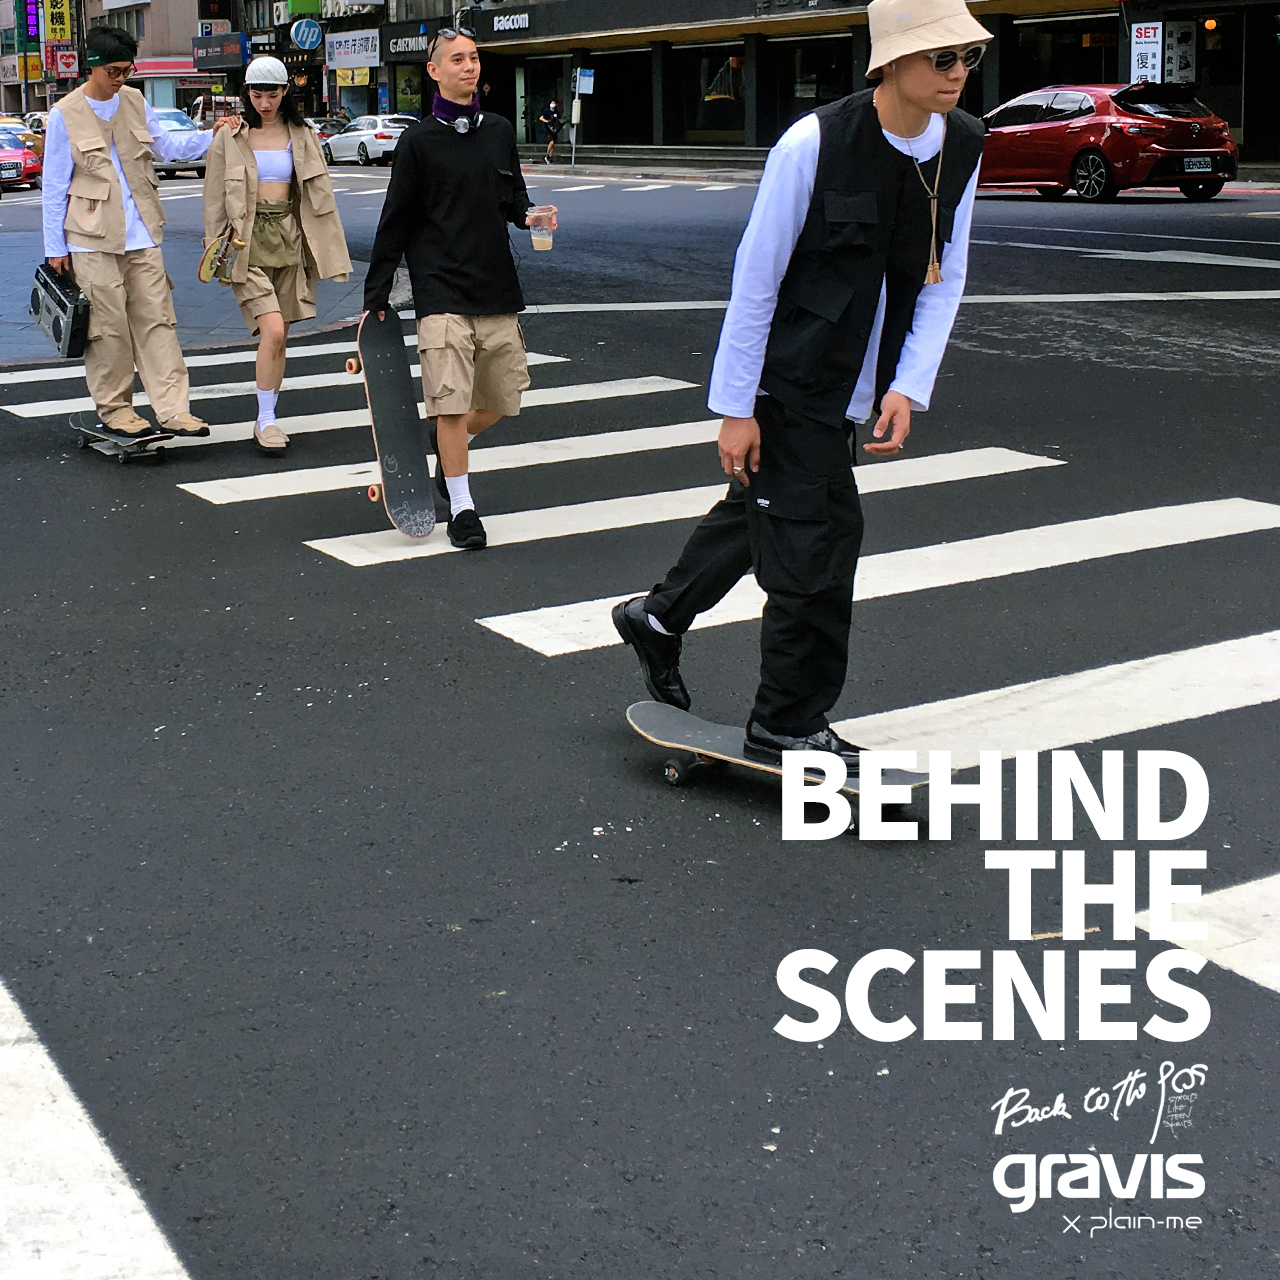 BEHIND THE SCENES 拍攝幕後花絮｜ gravis x plain-me ：BACK TO THE 90S